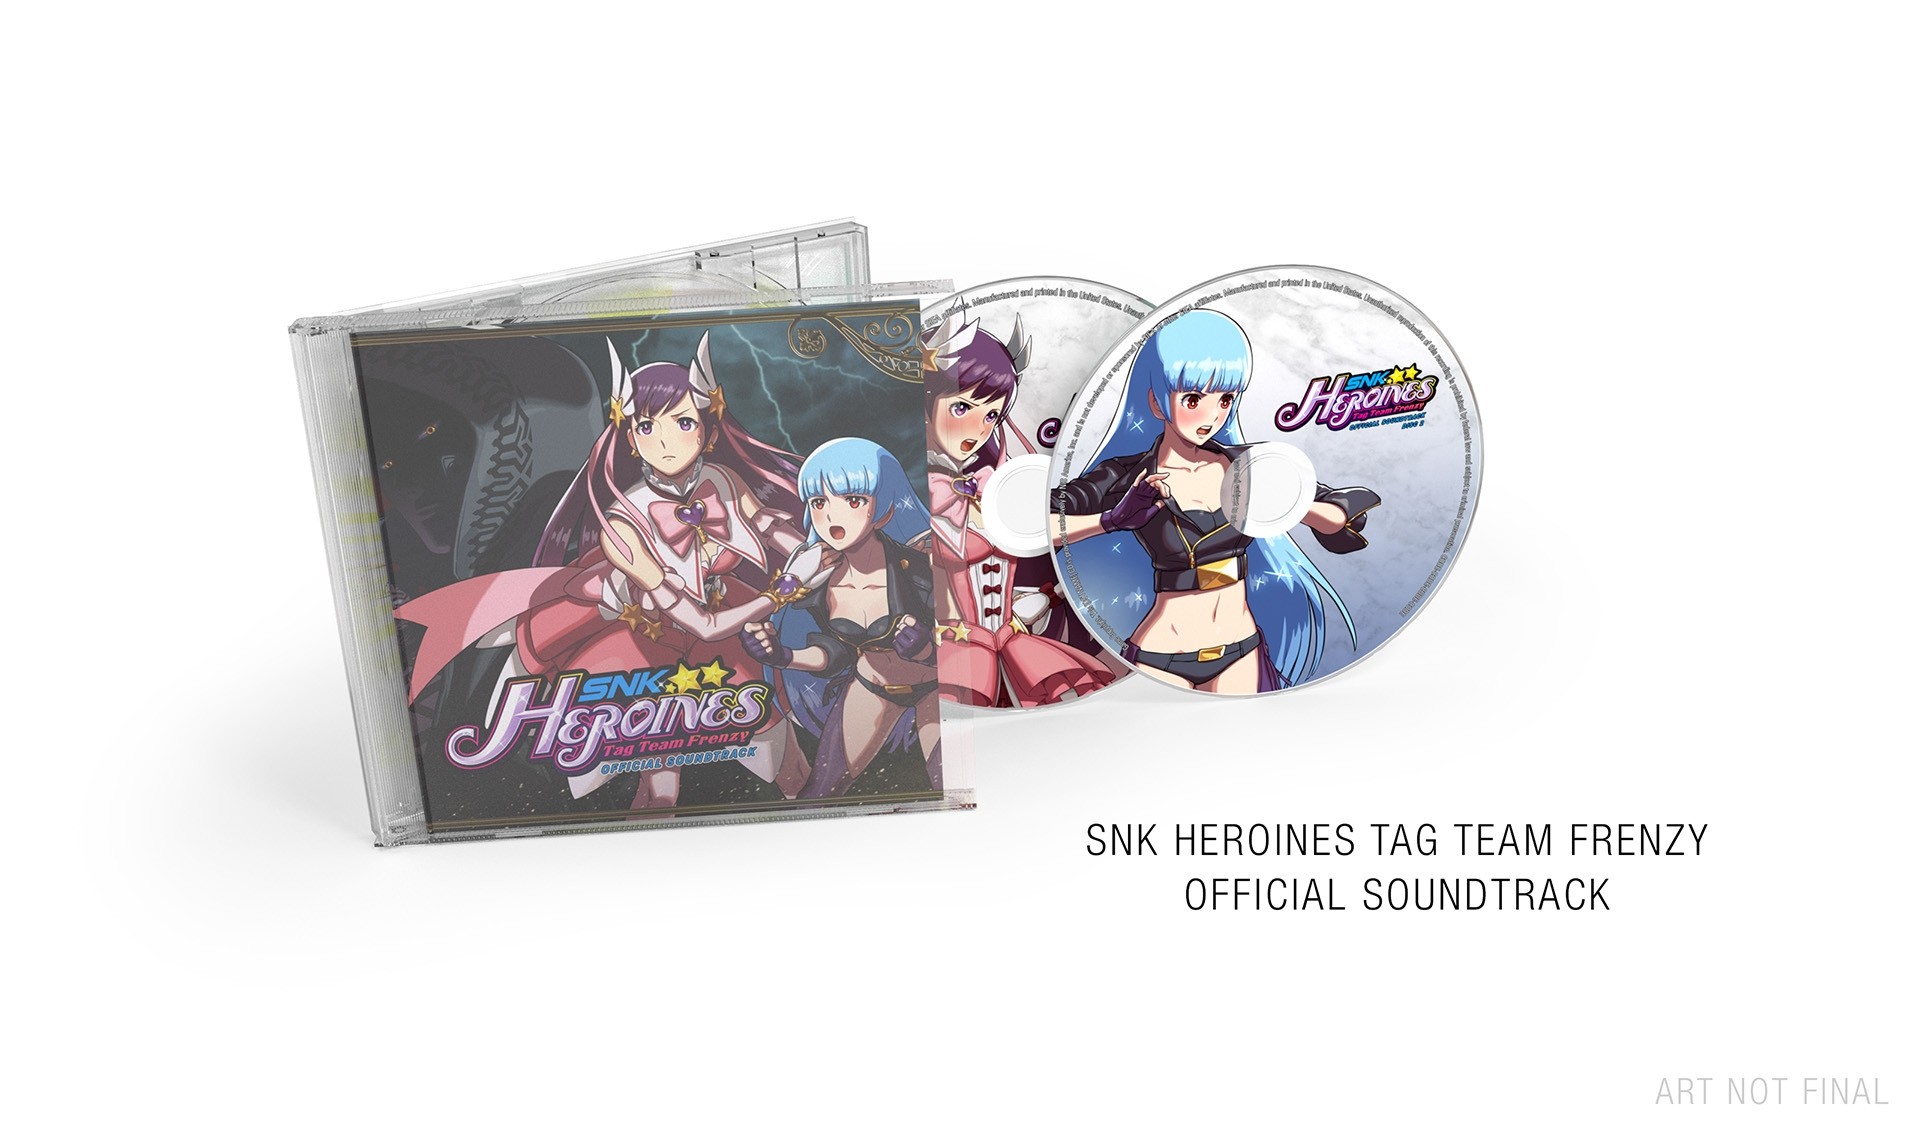 snk-heroines-tag-team-frenzy-soundtrack-cd-photo